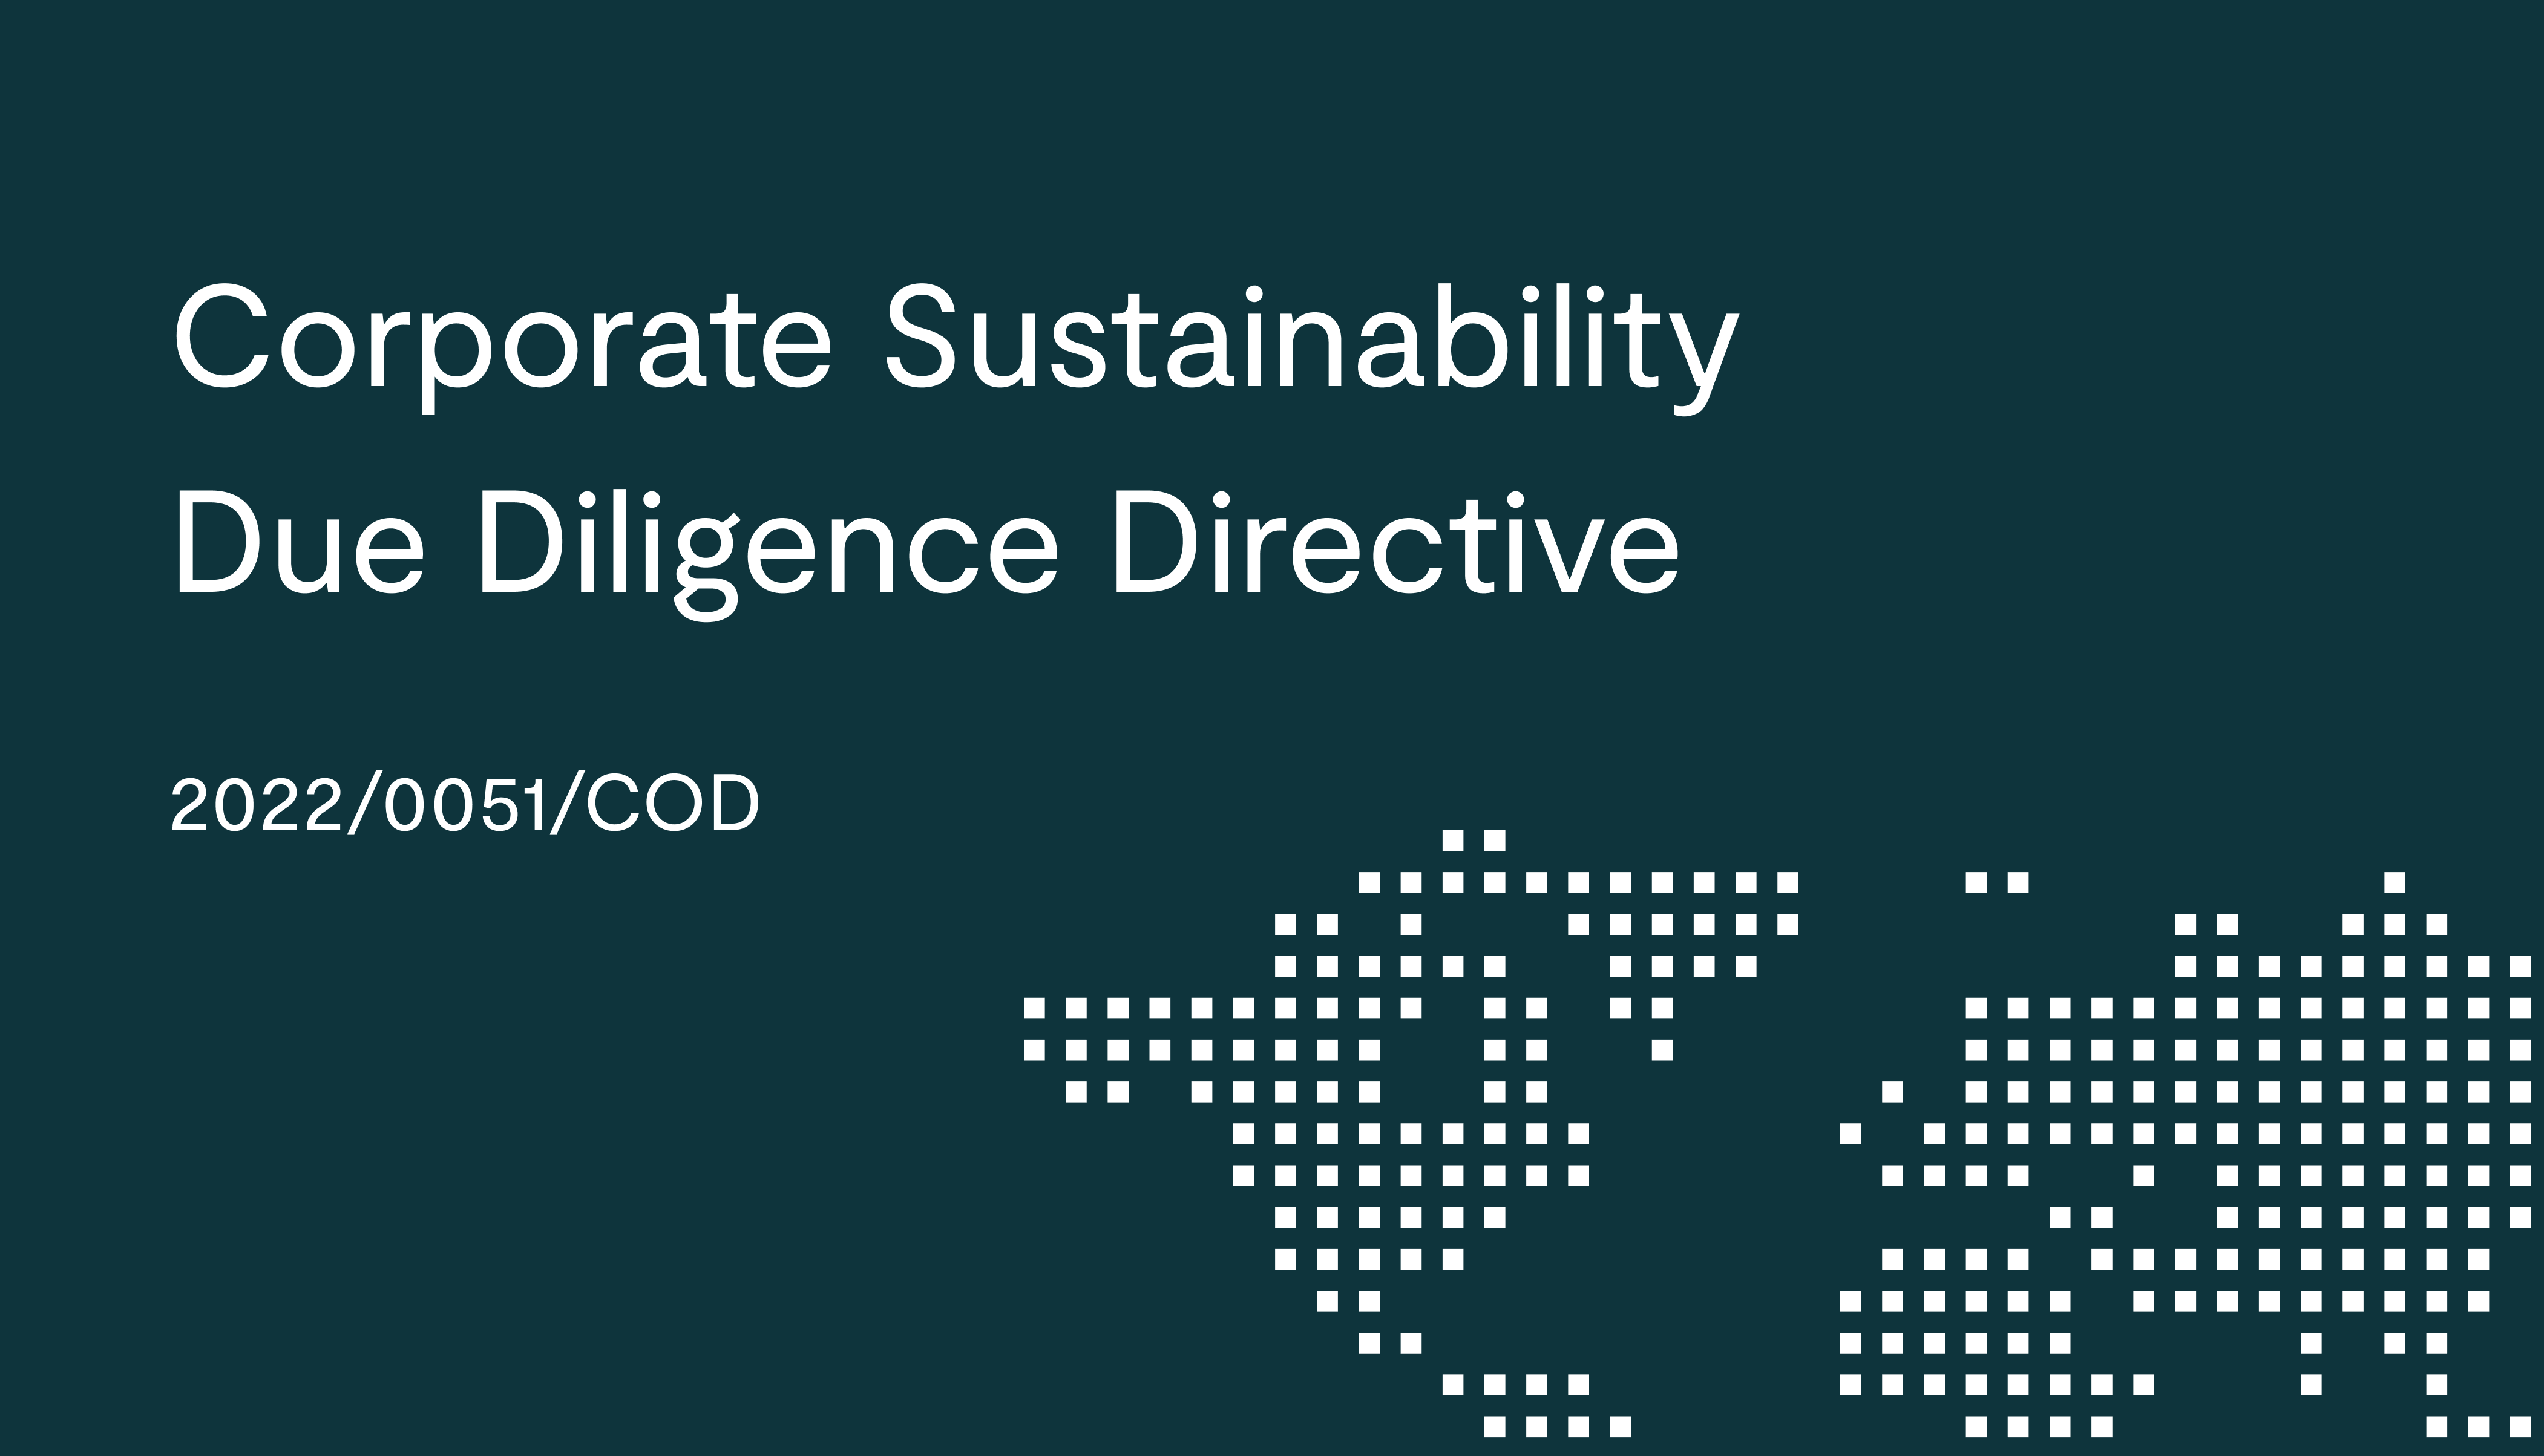 Corporate Sustainability Due Diligence Directive (2022/0051/COD)